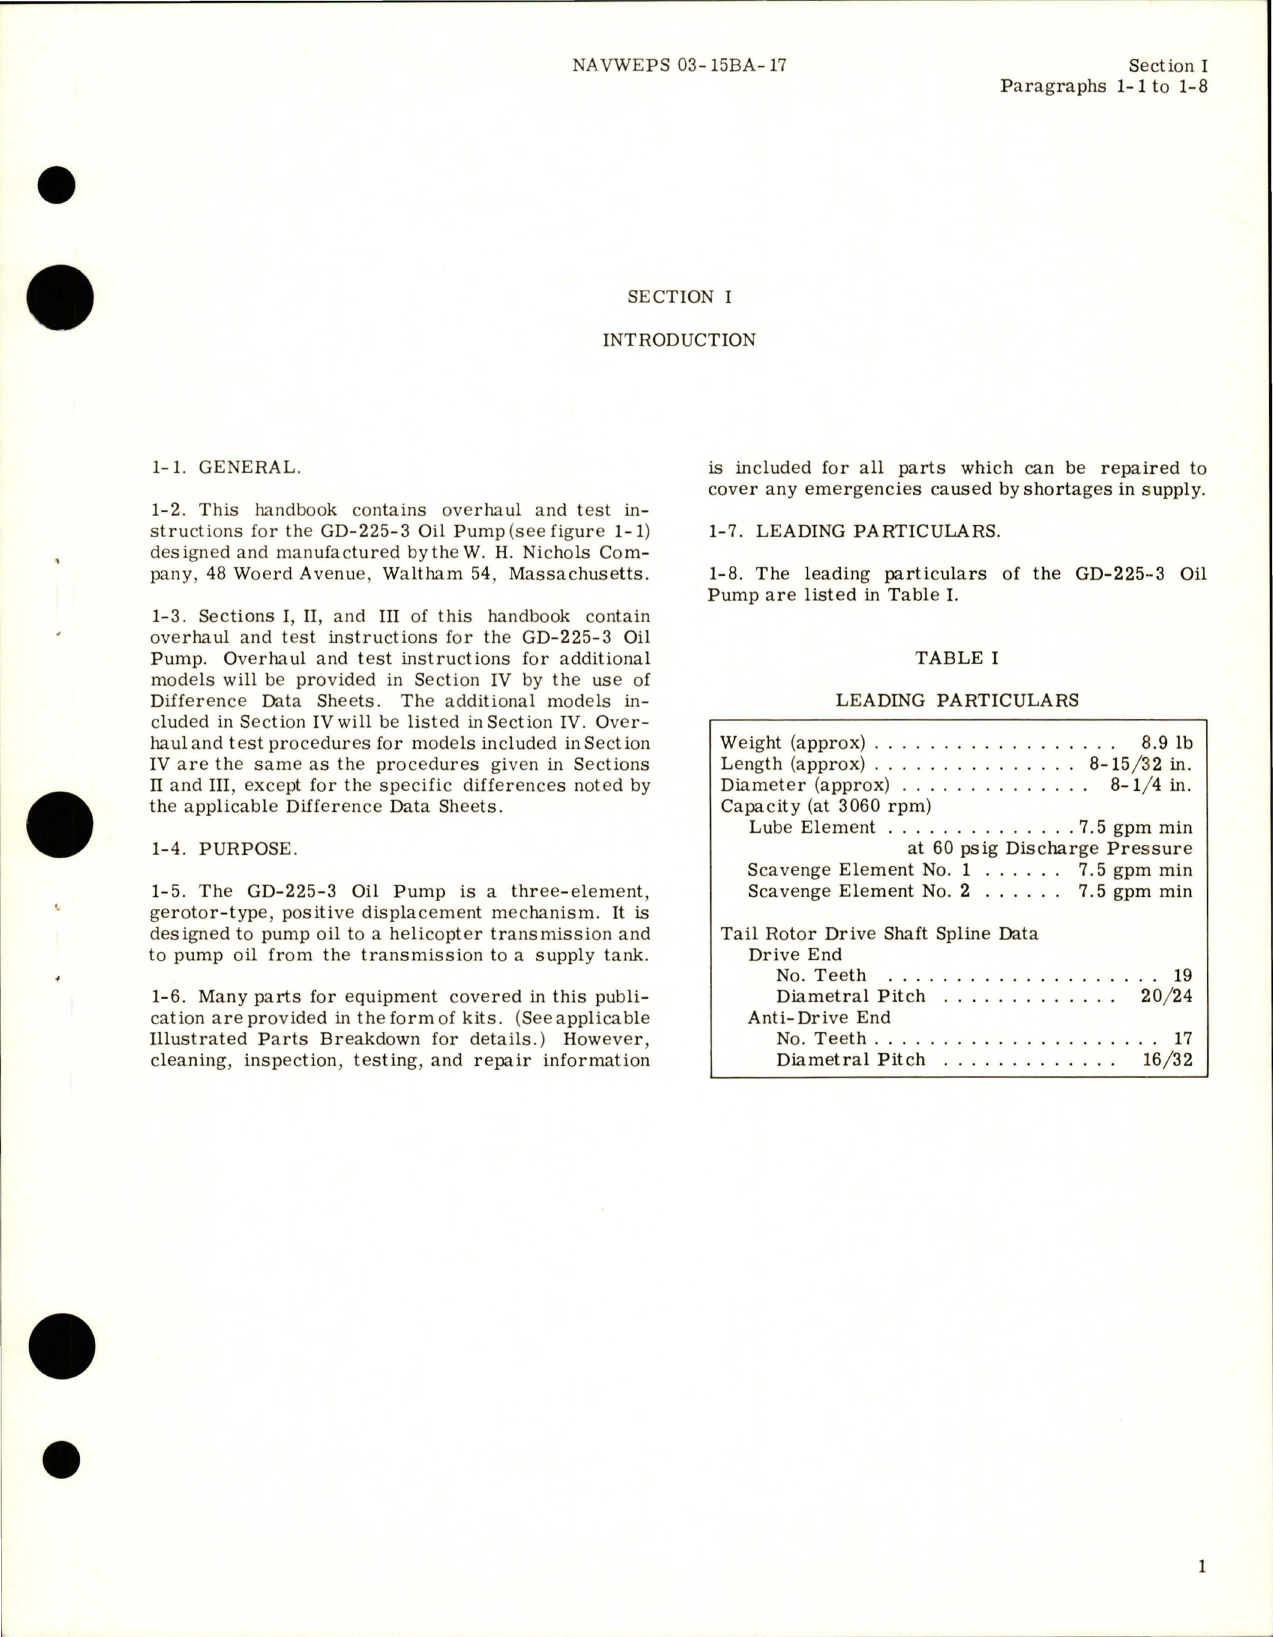 Sample page 5 from AirCorps Library document: Overhaul Instructions for Oil Pump - Part GD-225-3